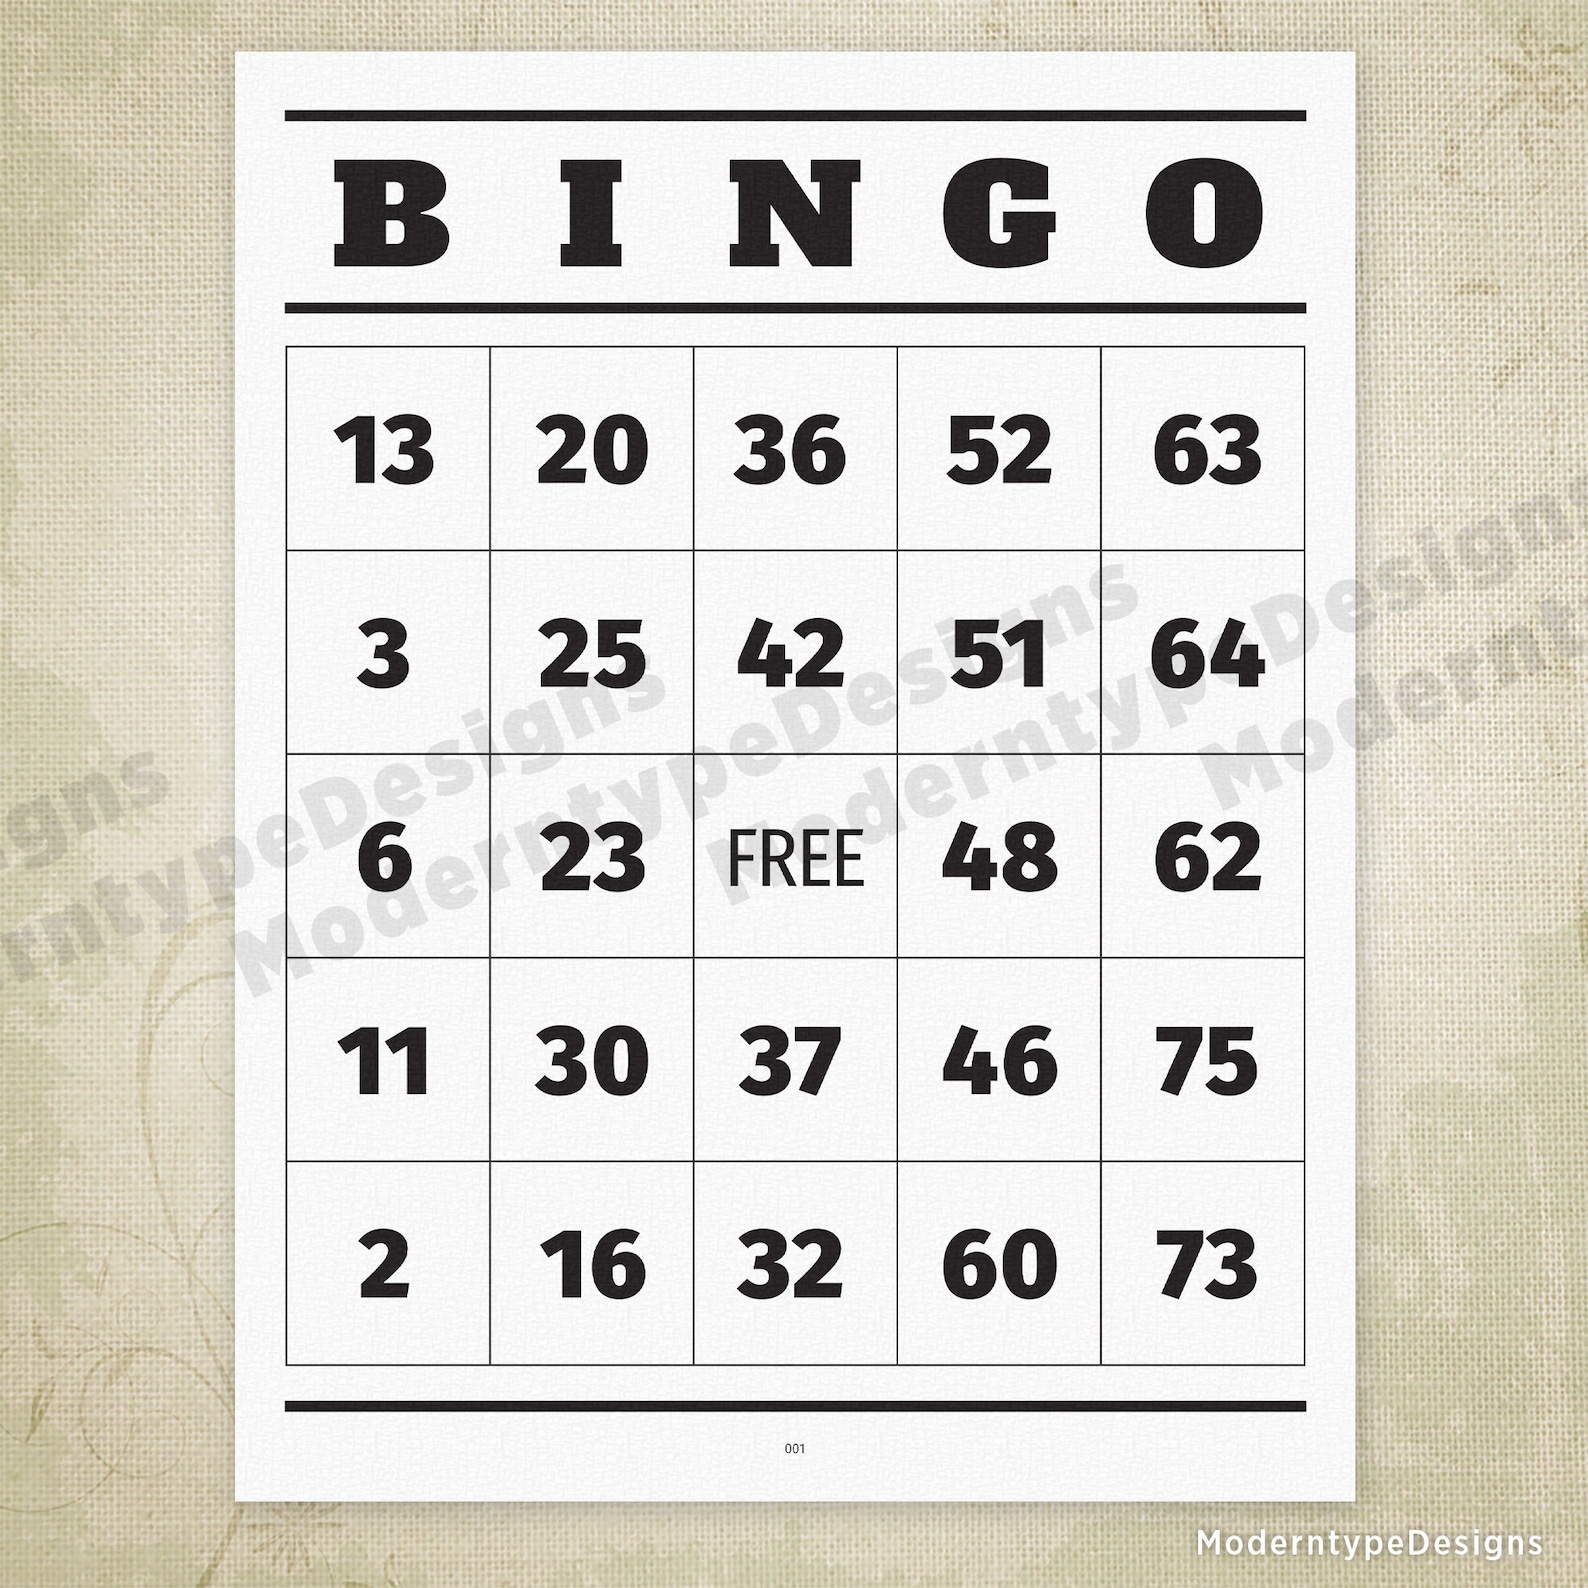 numbered-bingo-cards-printable-100-pages-1-75-random-etsy